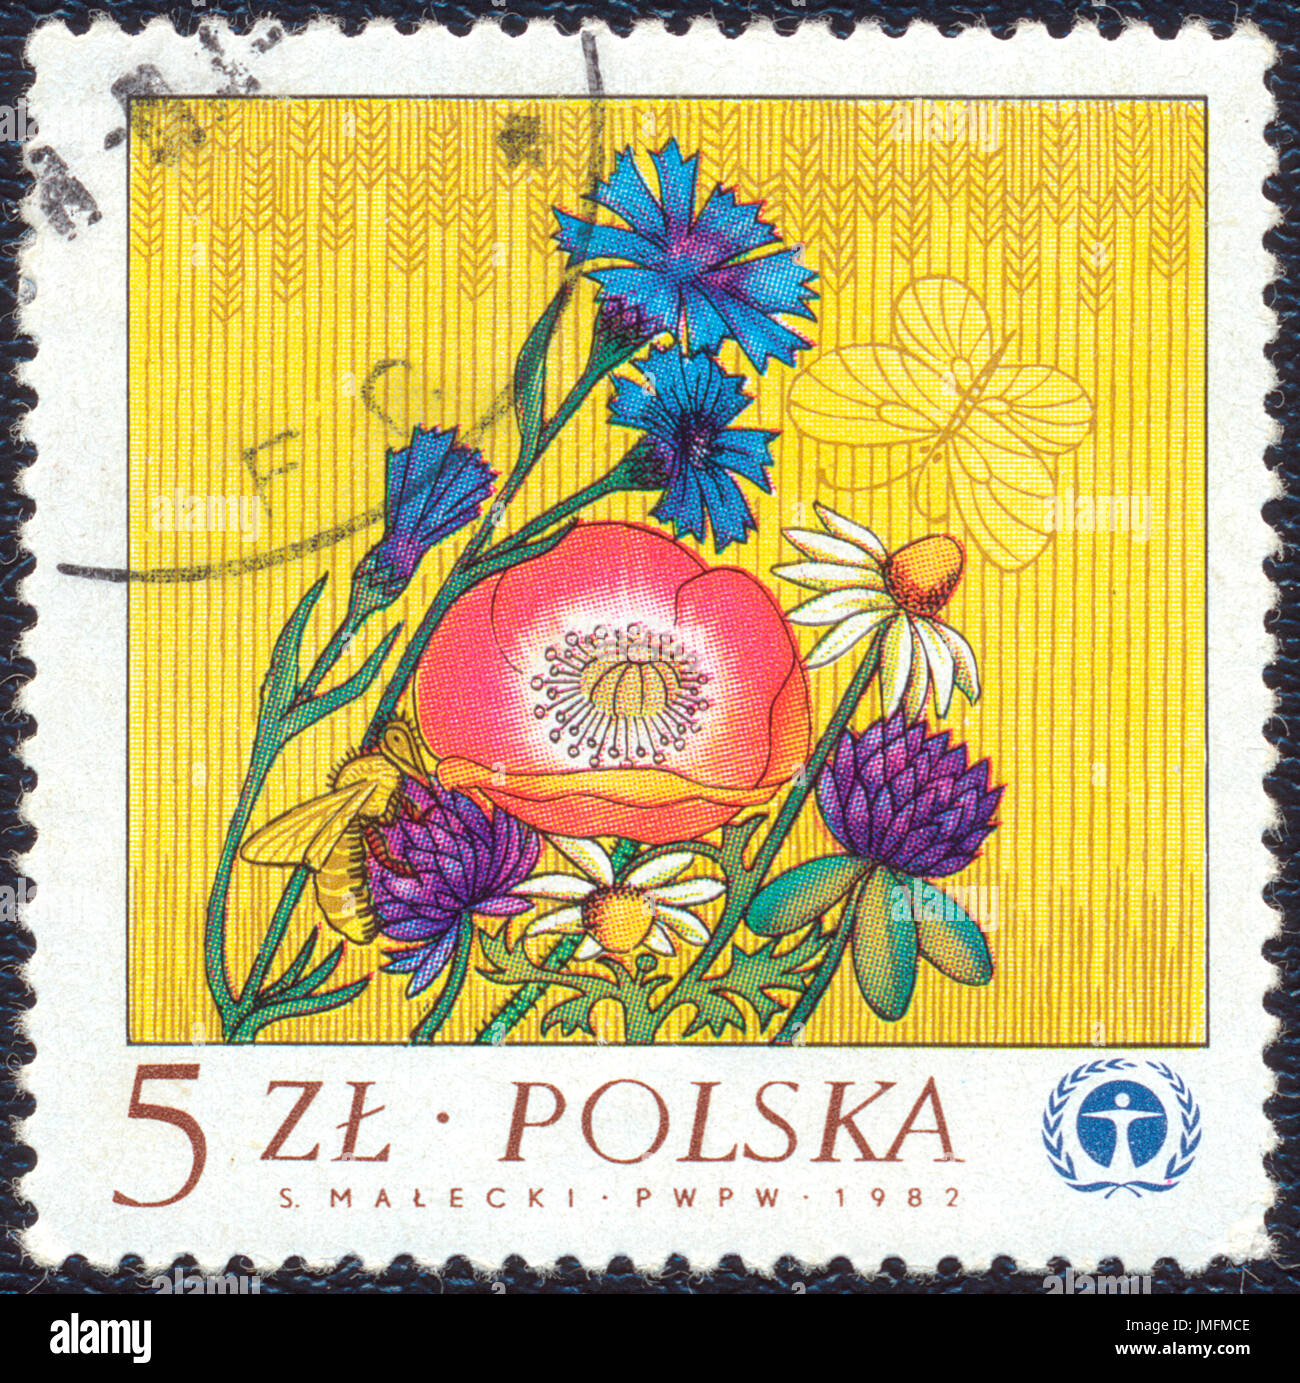 Poland - 1982: Postage stamp printed in Poland shows different flowers. Stamp printed by Polish Post circa 1982 Stock Photo